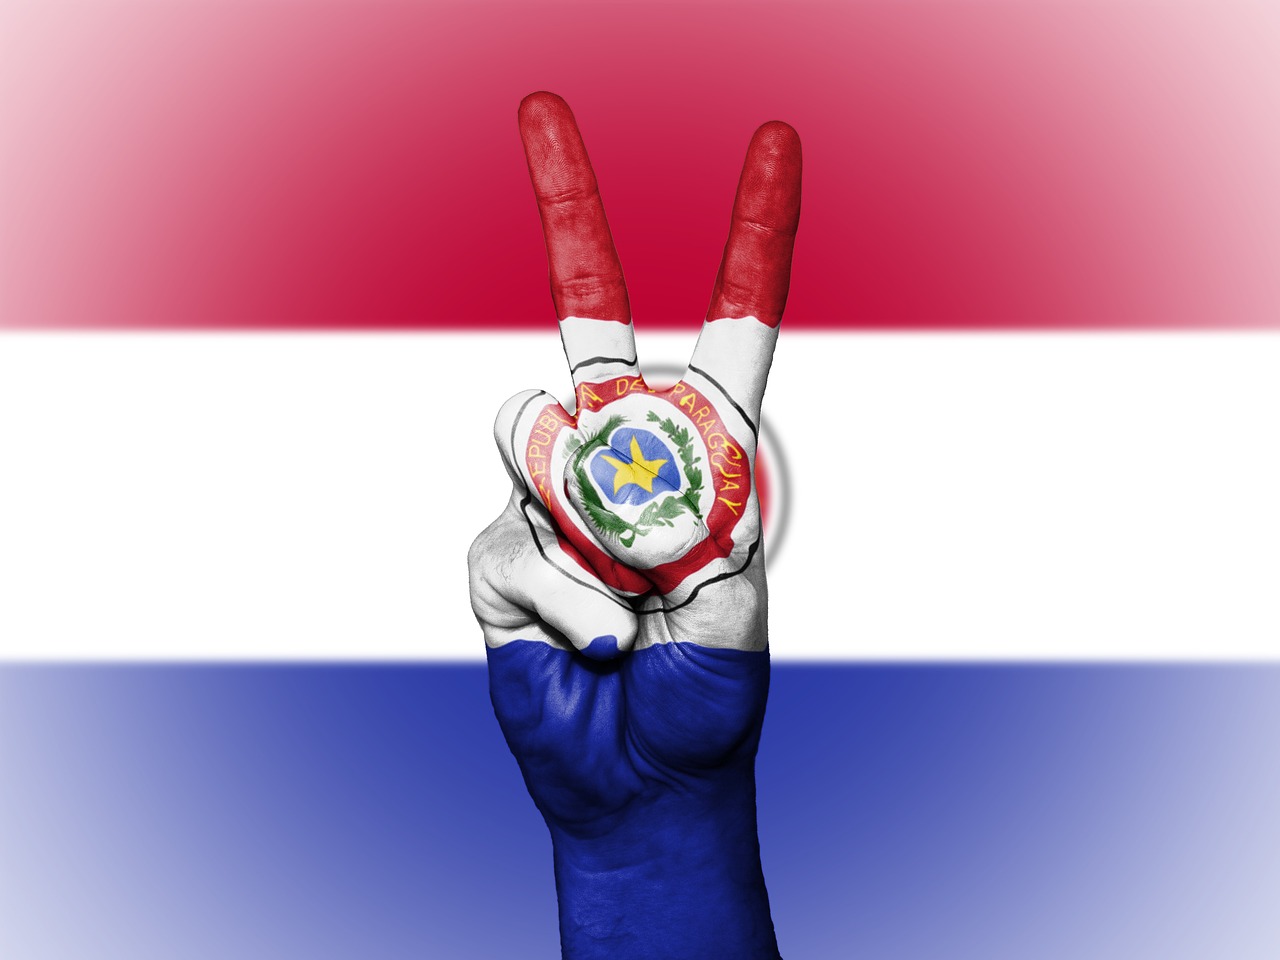 paraguay peace hand free photo